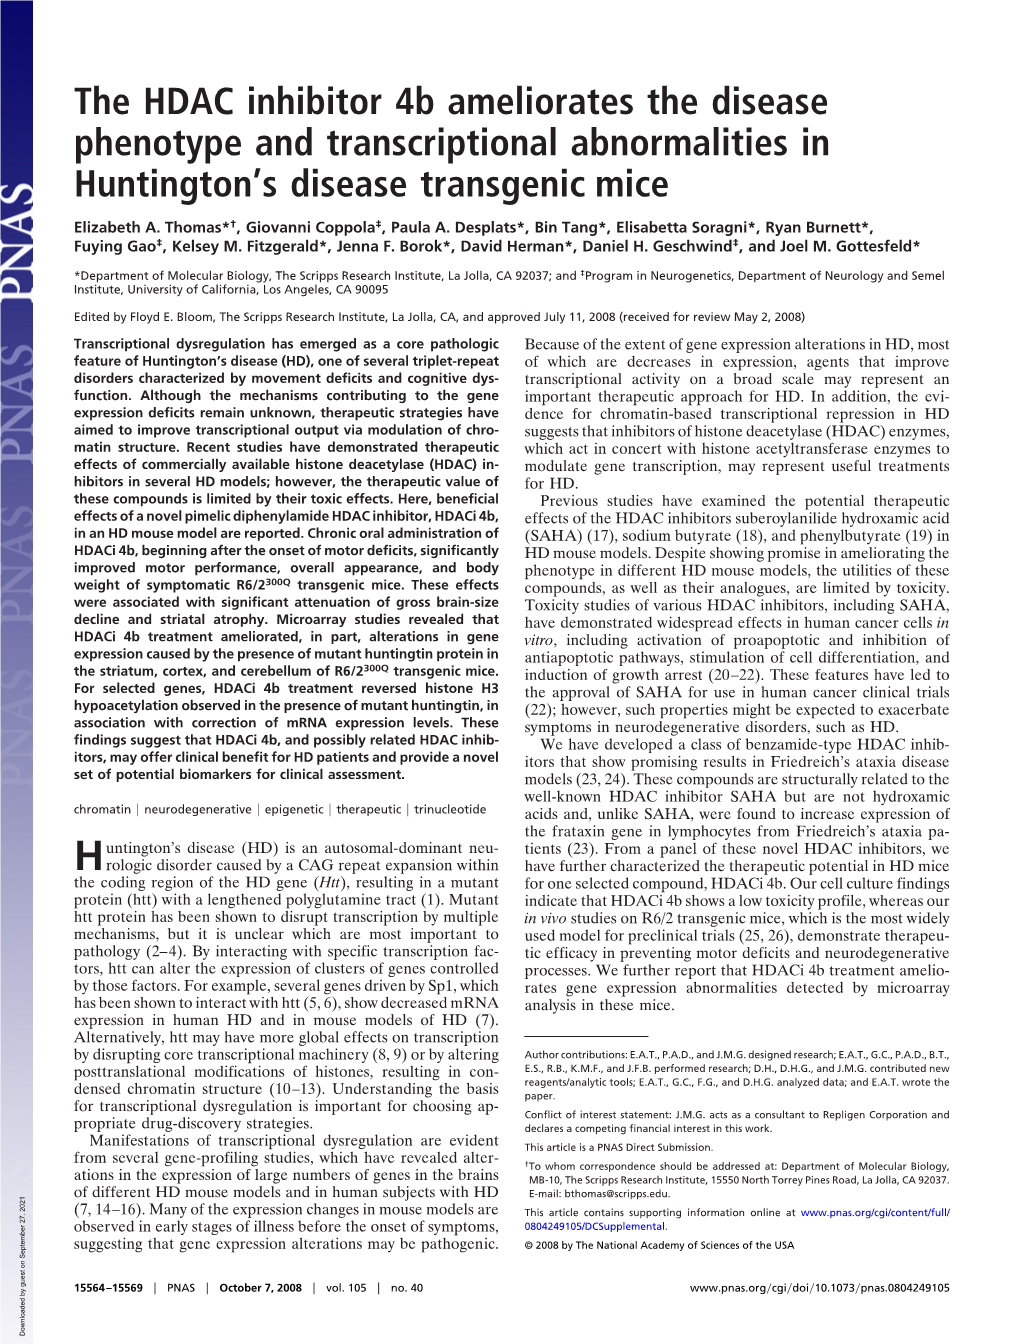 The HDAC Inhibitor 4B Ameliorates the Disease Phenotype and Transcriptional Abnormalities in Huntington's Disease Transgenic M